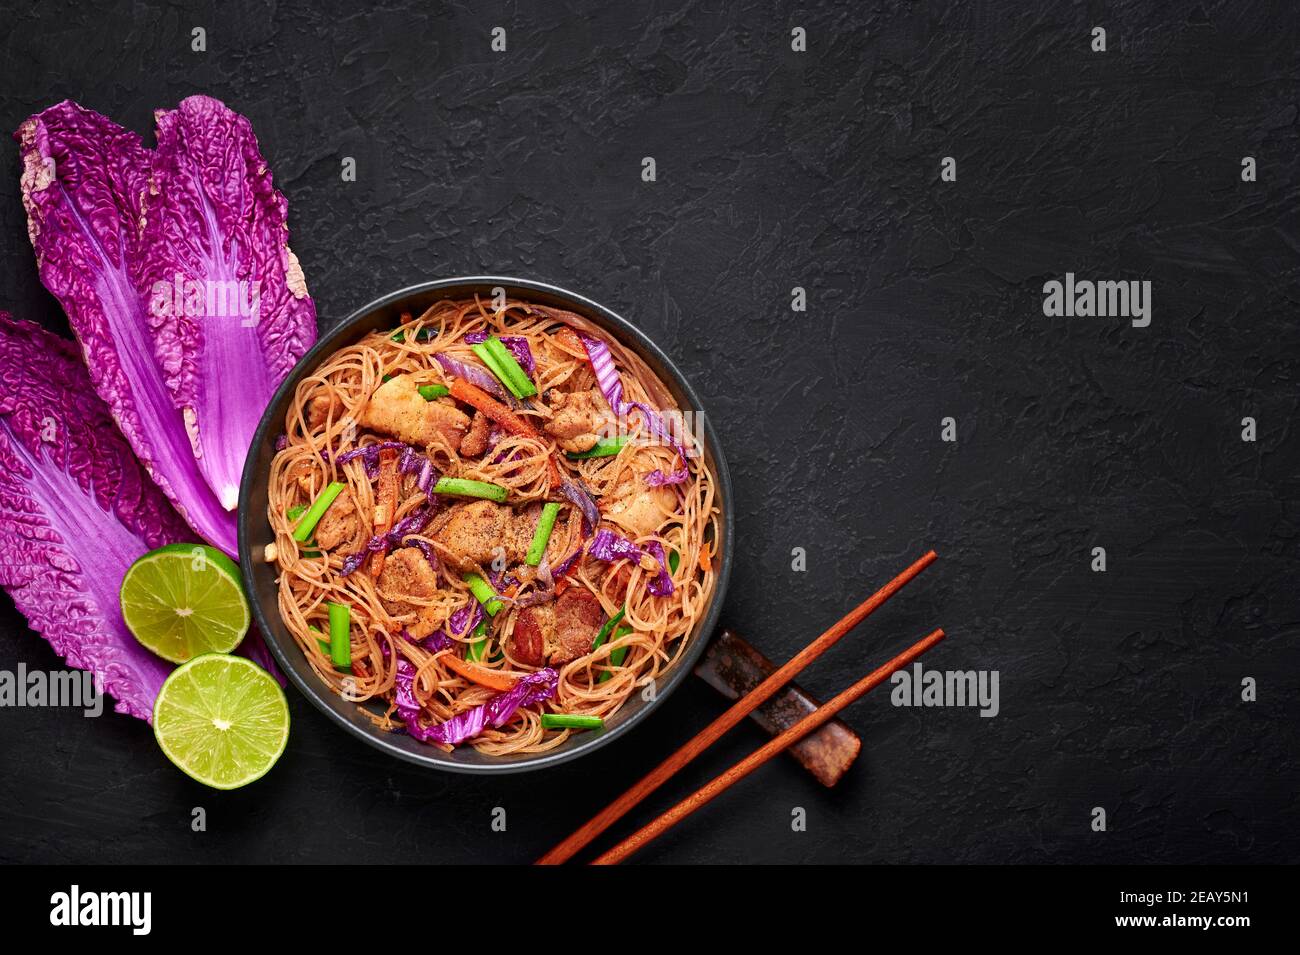 Pancit Bihon in black bowl on dark slate table top. Filipino cuisine noodles dish with pork belly, chicken, vegetables. Asian food. Top view. Copy spa Stock Photo